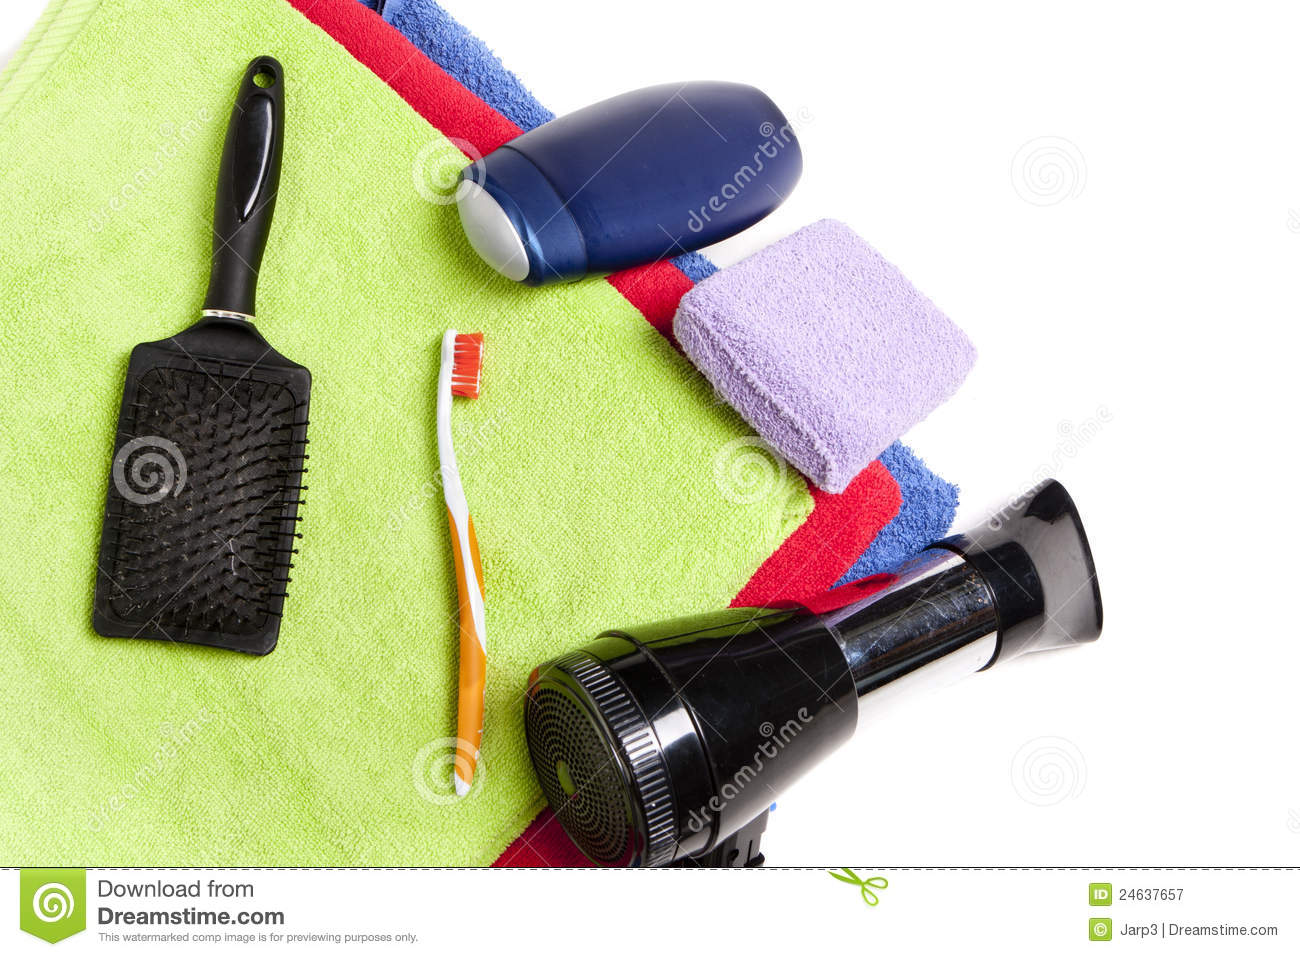 Hygiene Items Royalty Free Stock Photography   Image  24637657